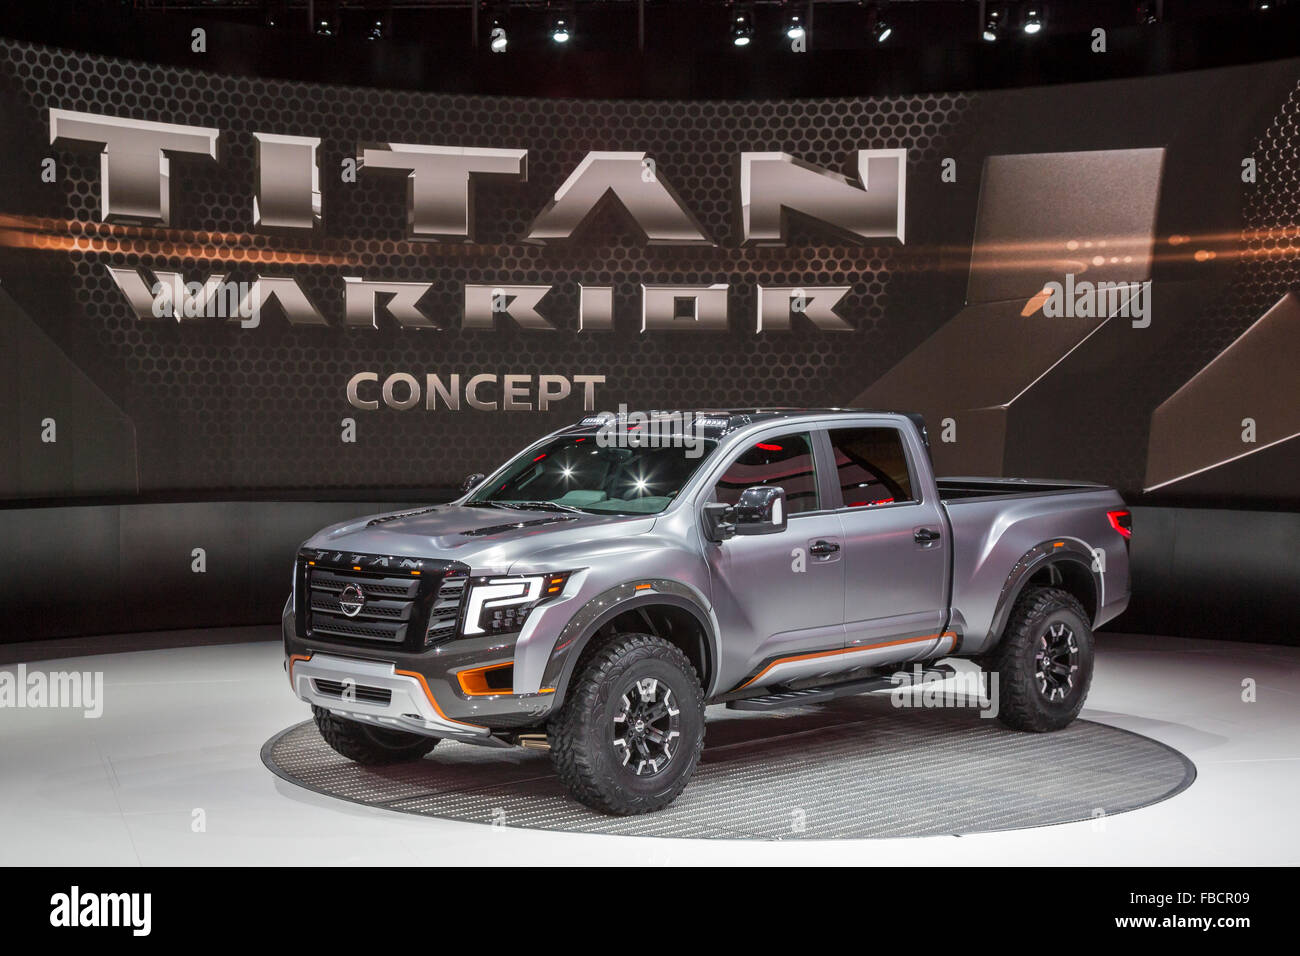 Detroit, Michigan - Nissan's Titan Warrior concept truck on display at the North American International Auto Show. Stock Photo